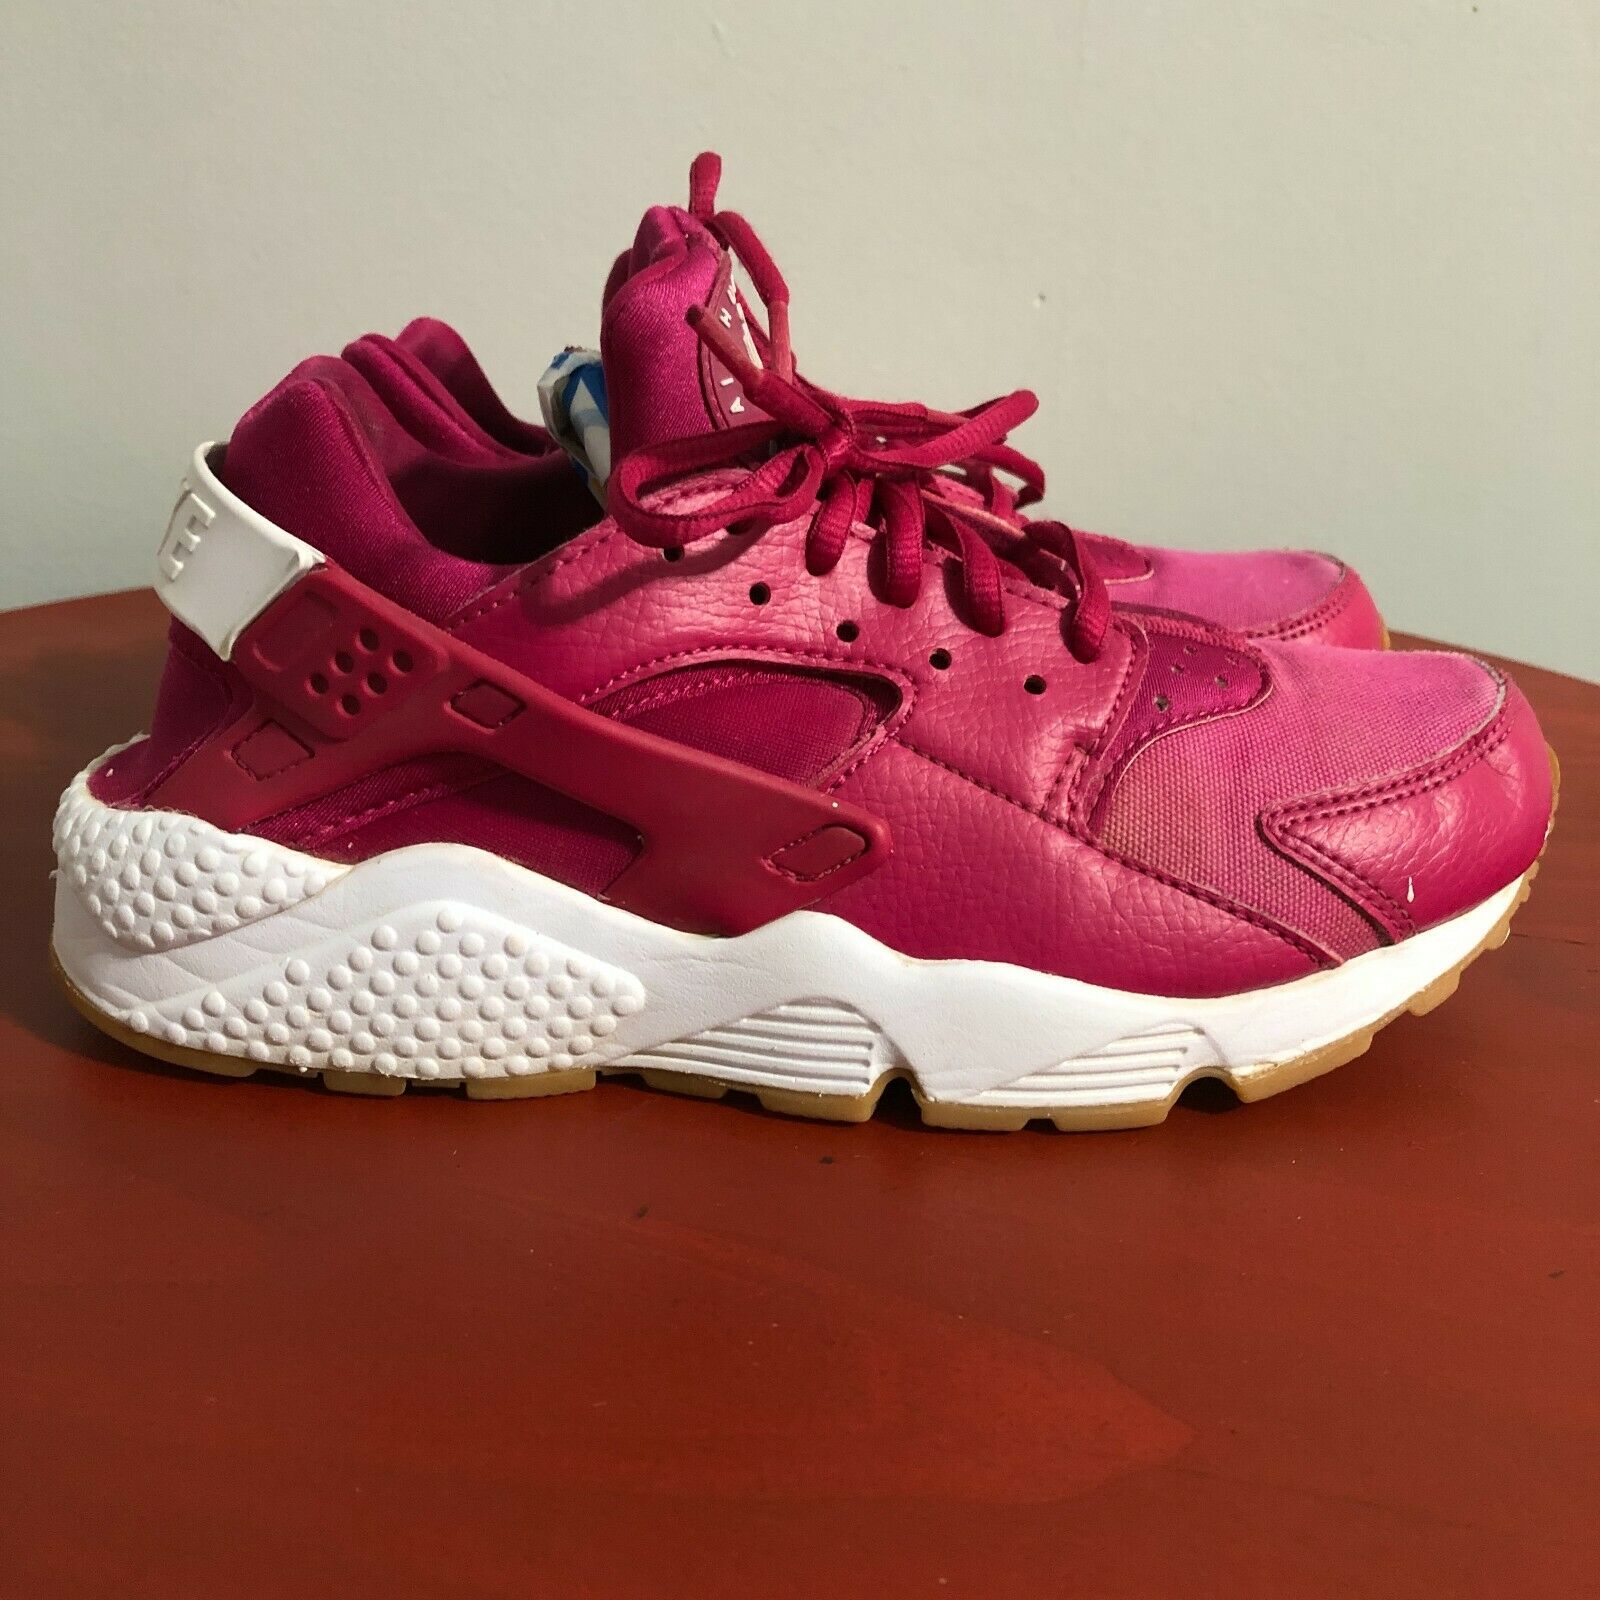 Nike Air Huarache Women's Size 7.5 Running Shoes Pink White Athletic Sneakers